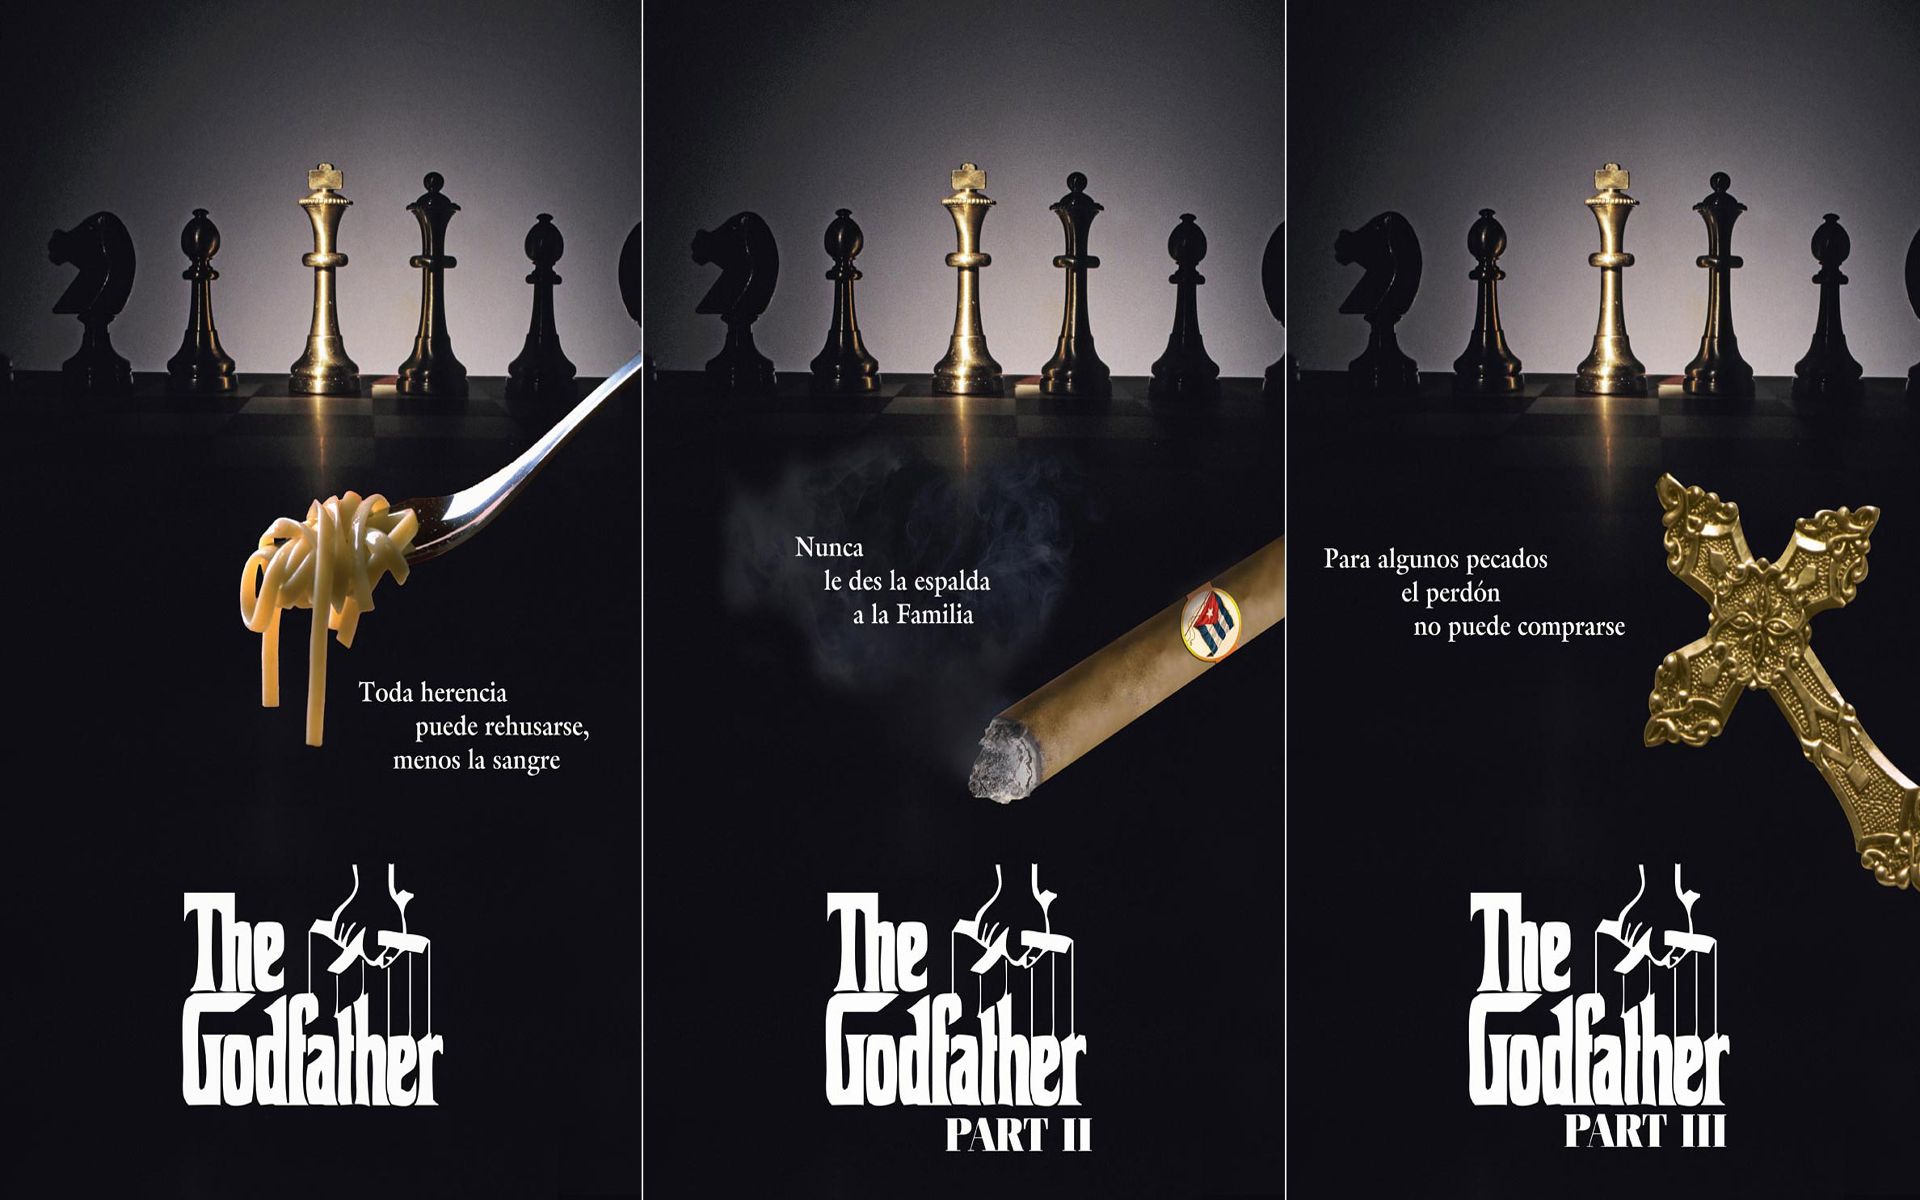 The Godfather Quotes Wallpapers. QuotesGram